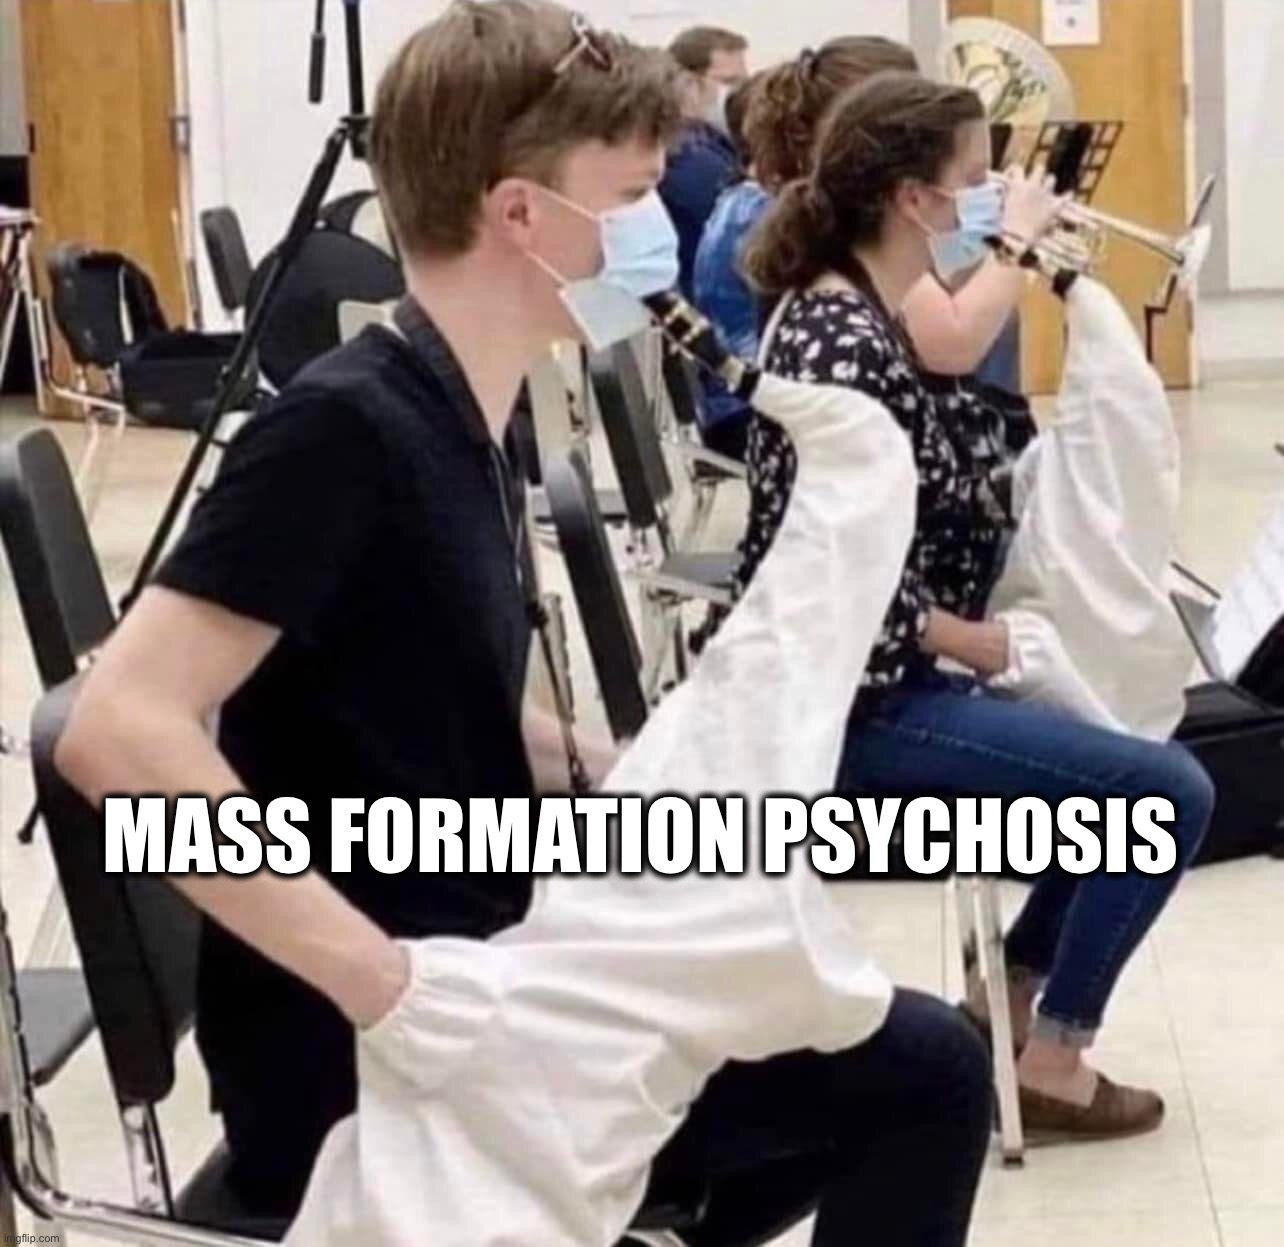 MASS FORMATION PSYCHOSIS | image tagged in memes,covid-19,social media,lockdown,masks,vaccines | made w/ Imgflip meme maker